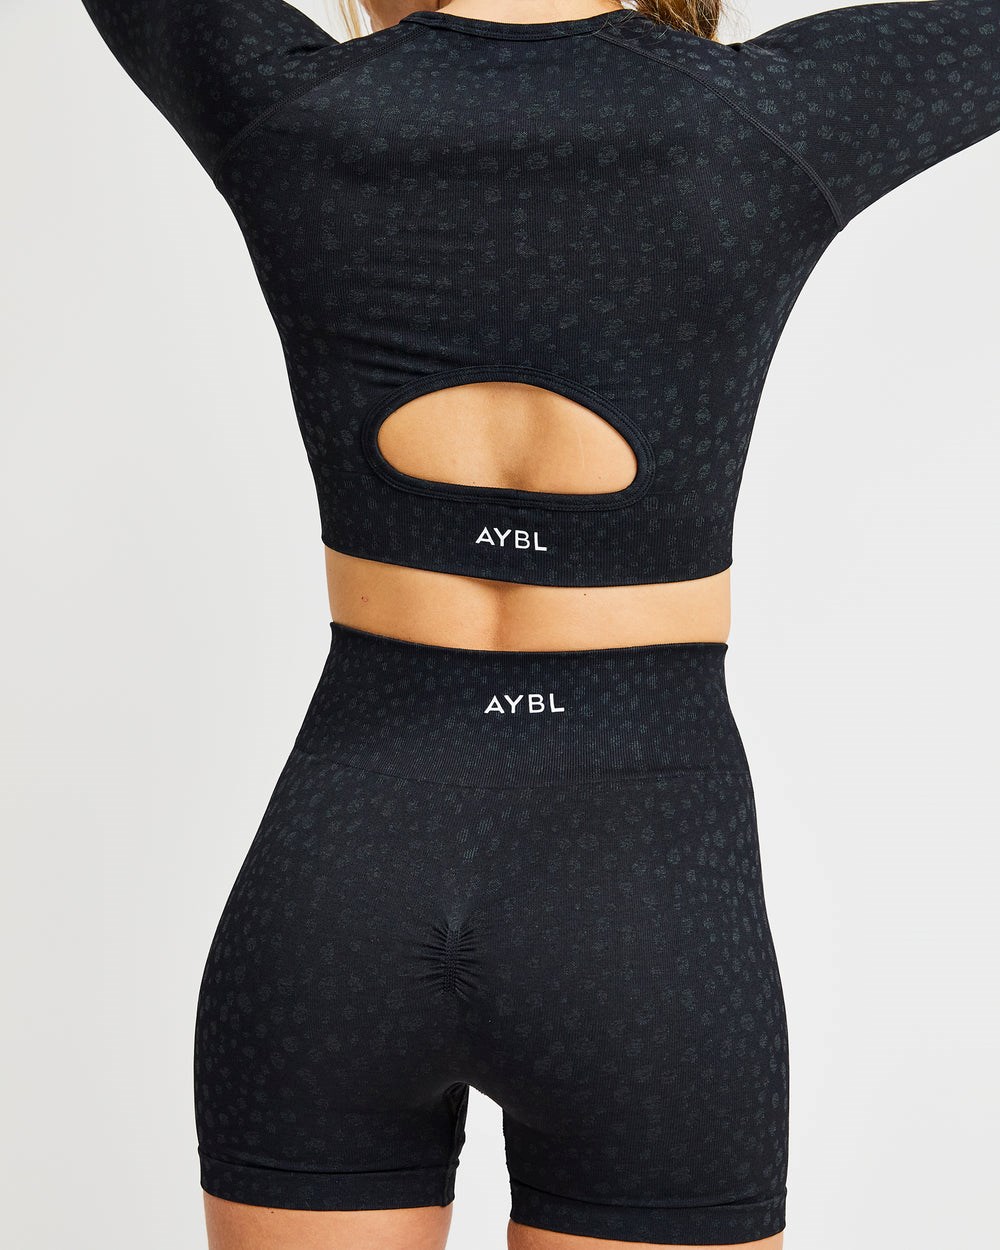 Shop AYBL Evolve Speckle Seamless Shorts Online - Get Up To 70